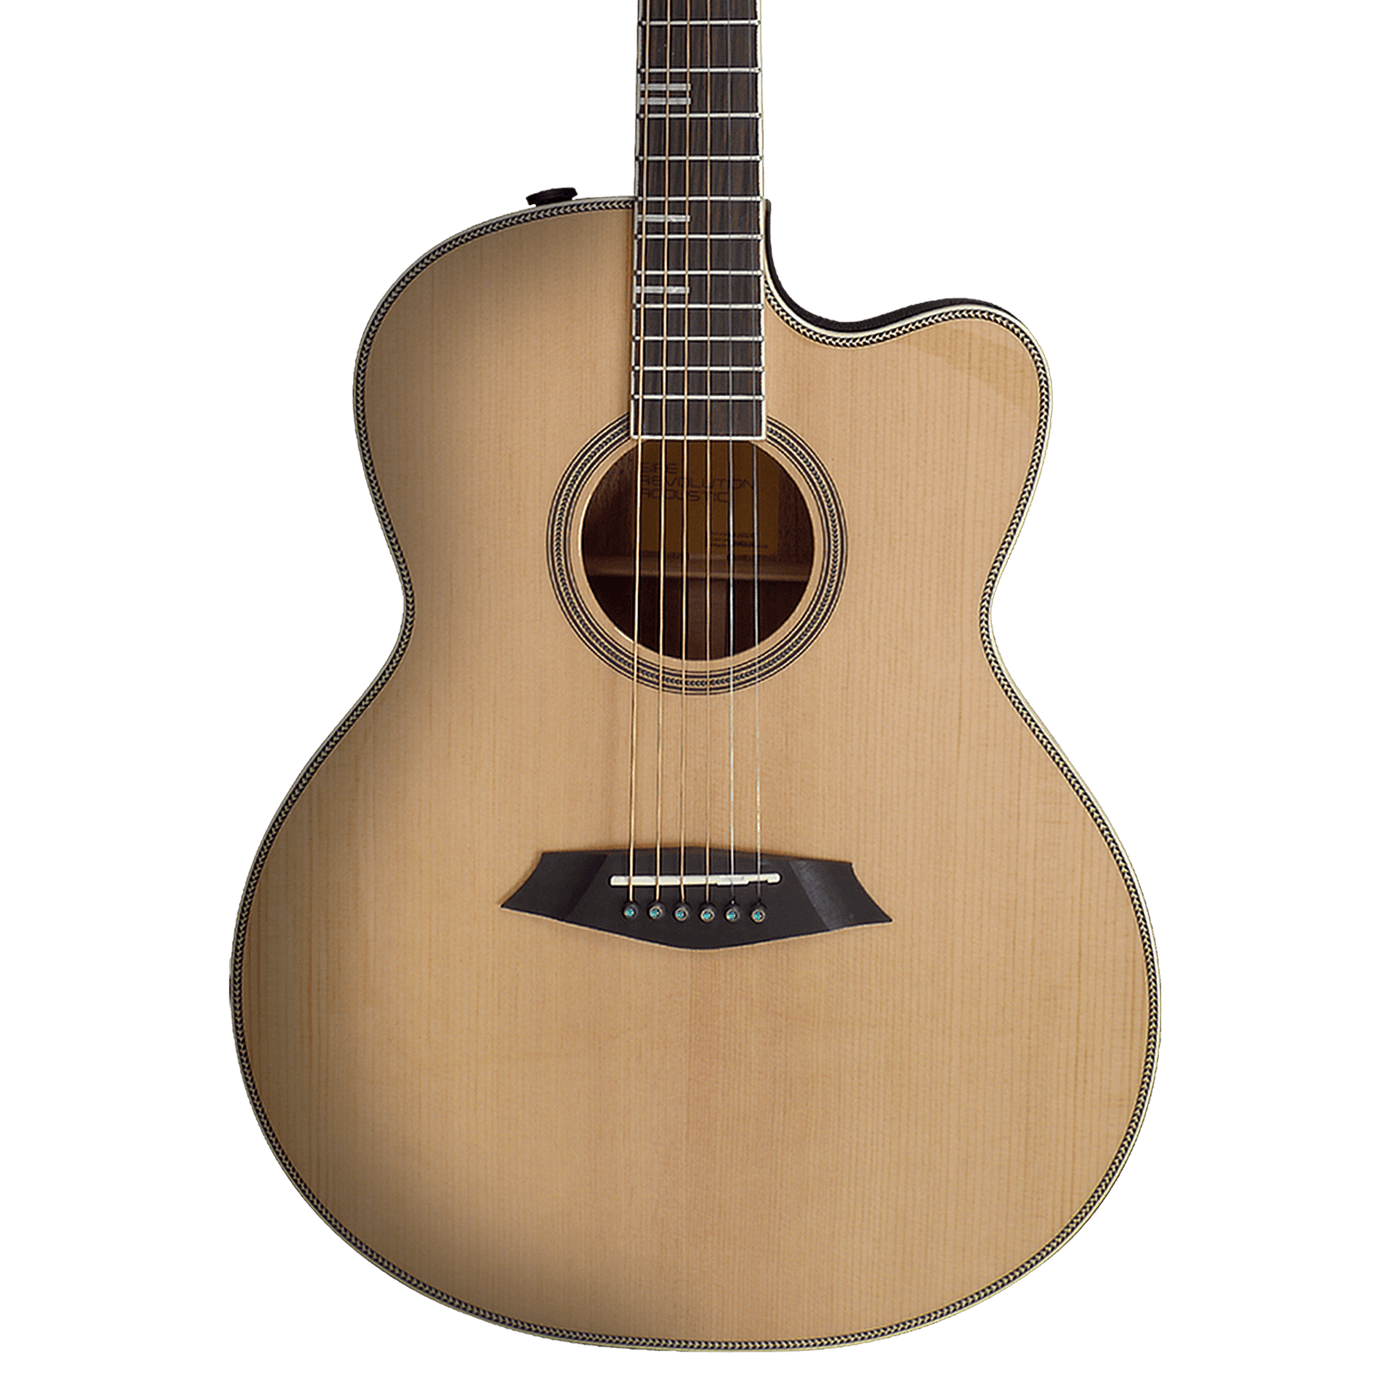 Sire A4-G Natural - $799990 - Gearhub - The upgraded Sire acoustic guitar is brimming with design and features meeting the quality standard of Larry Carlton. The A4 has two body shapes - Dreadnought and Grand Auditorium. More than the comfort from the rolled fretboard edges, the added solid Mahogany back plate makes the acoustic guitar more worth than its value. Cuerpo • Modelo: Larry Carlton A4-G (Grand Auditorium)• Top: Roasted Solid Spruce• Sides: Mahogany• Top: Solid Mahogany • Terminación: Polyurethane